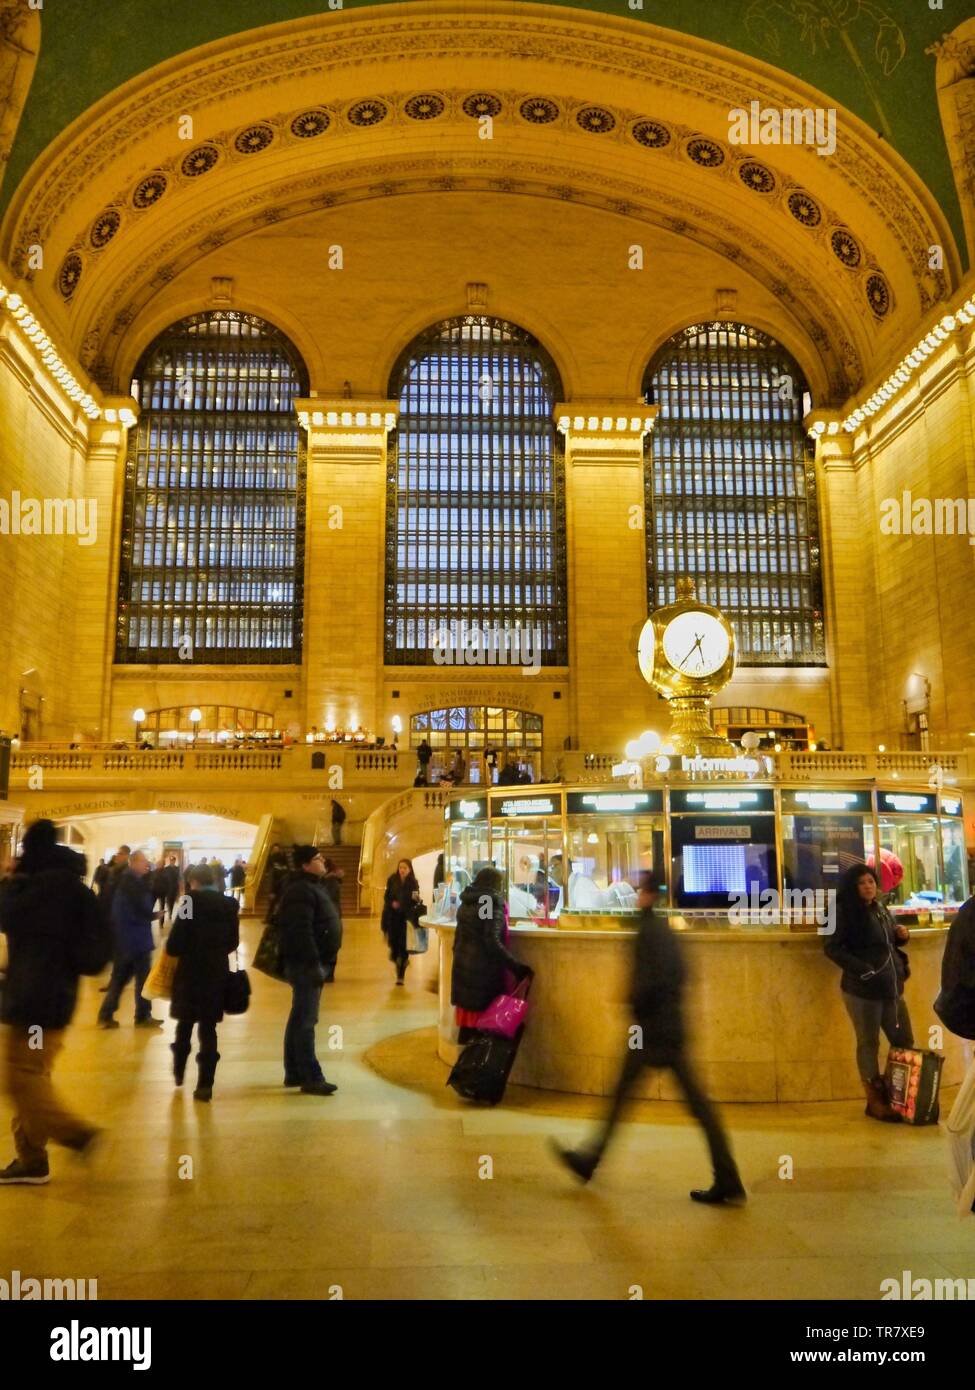 People walking inside New York Central Station Stock Photo